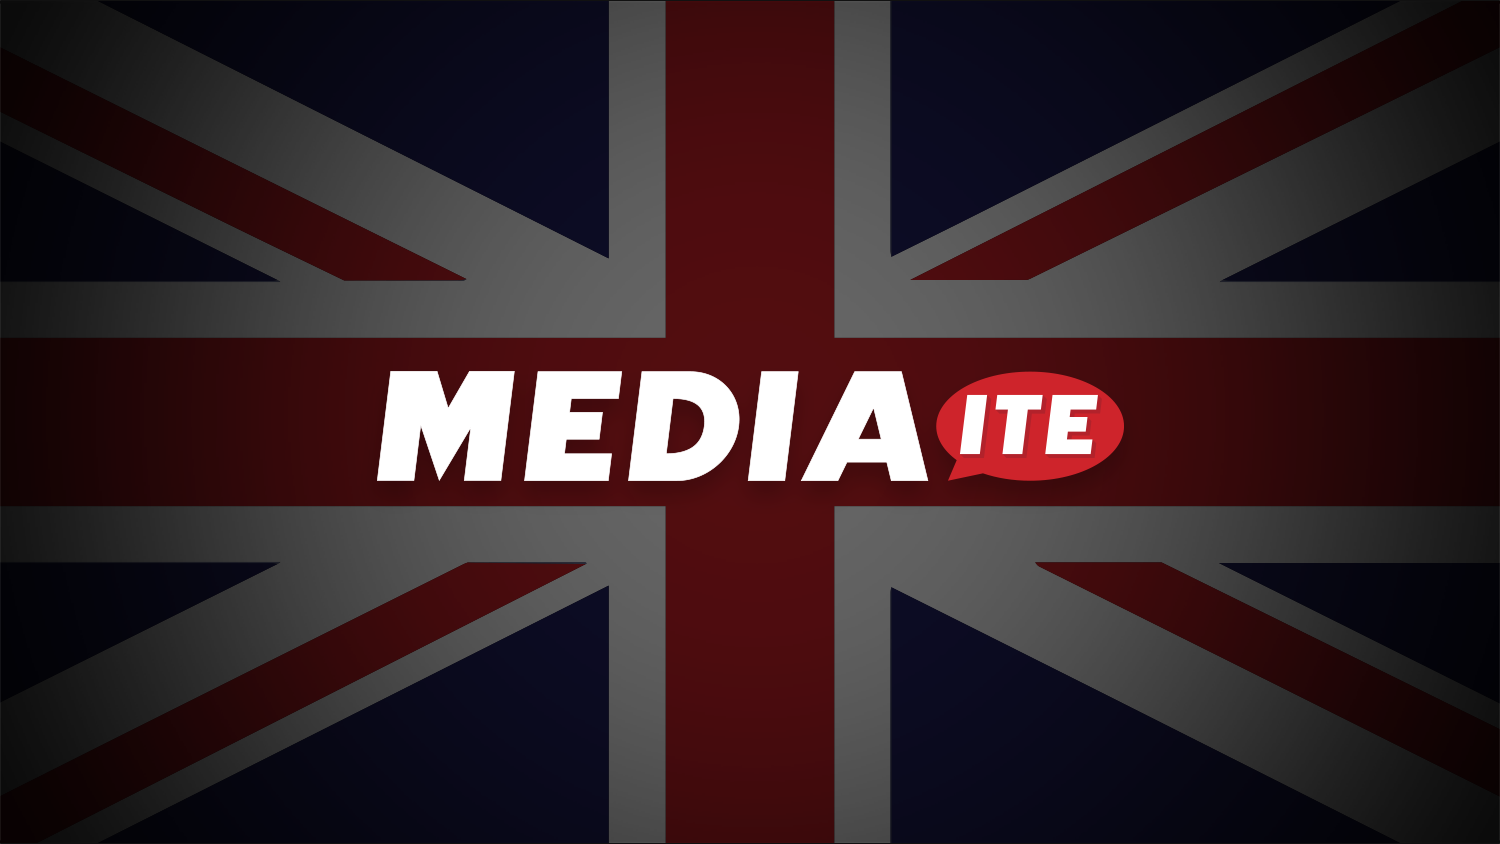 JUST IN: Mediaite Launches New Vertical to Cover Media and Politics in the UK